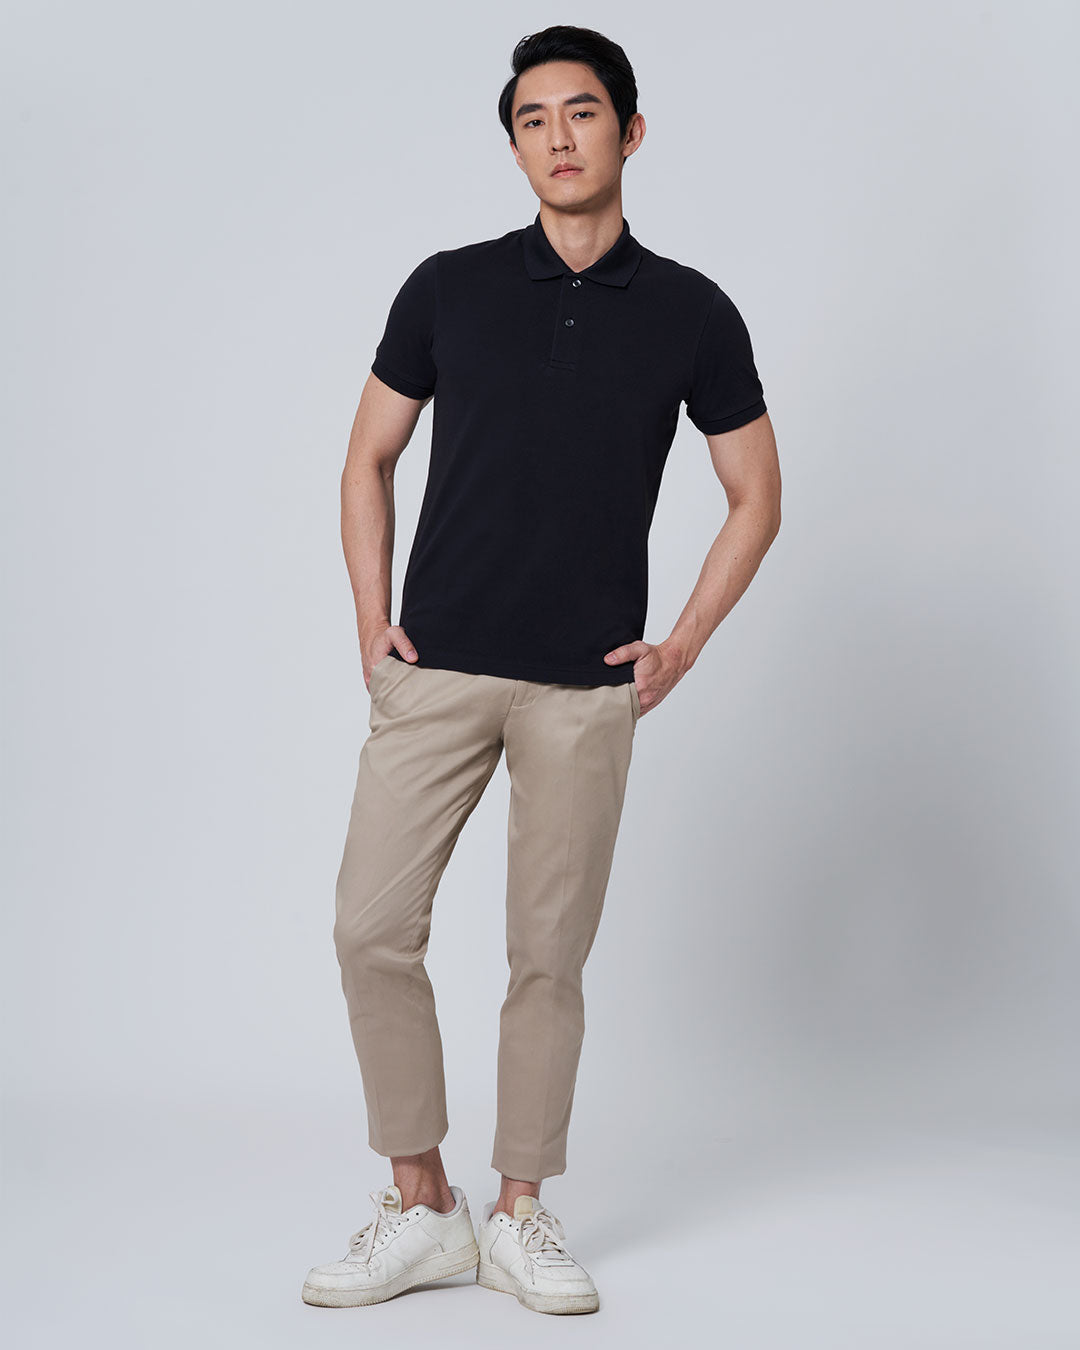 Black Poloshirt Men Shirts Outfit Trends With Beige Casual Trouser  Casual Outfit Hombre Juvenil  Dress shirt casual wear mens style mens  clothing